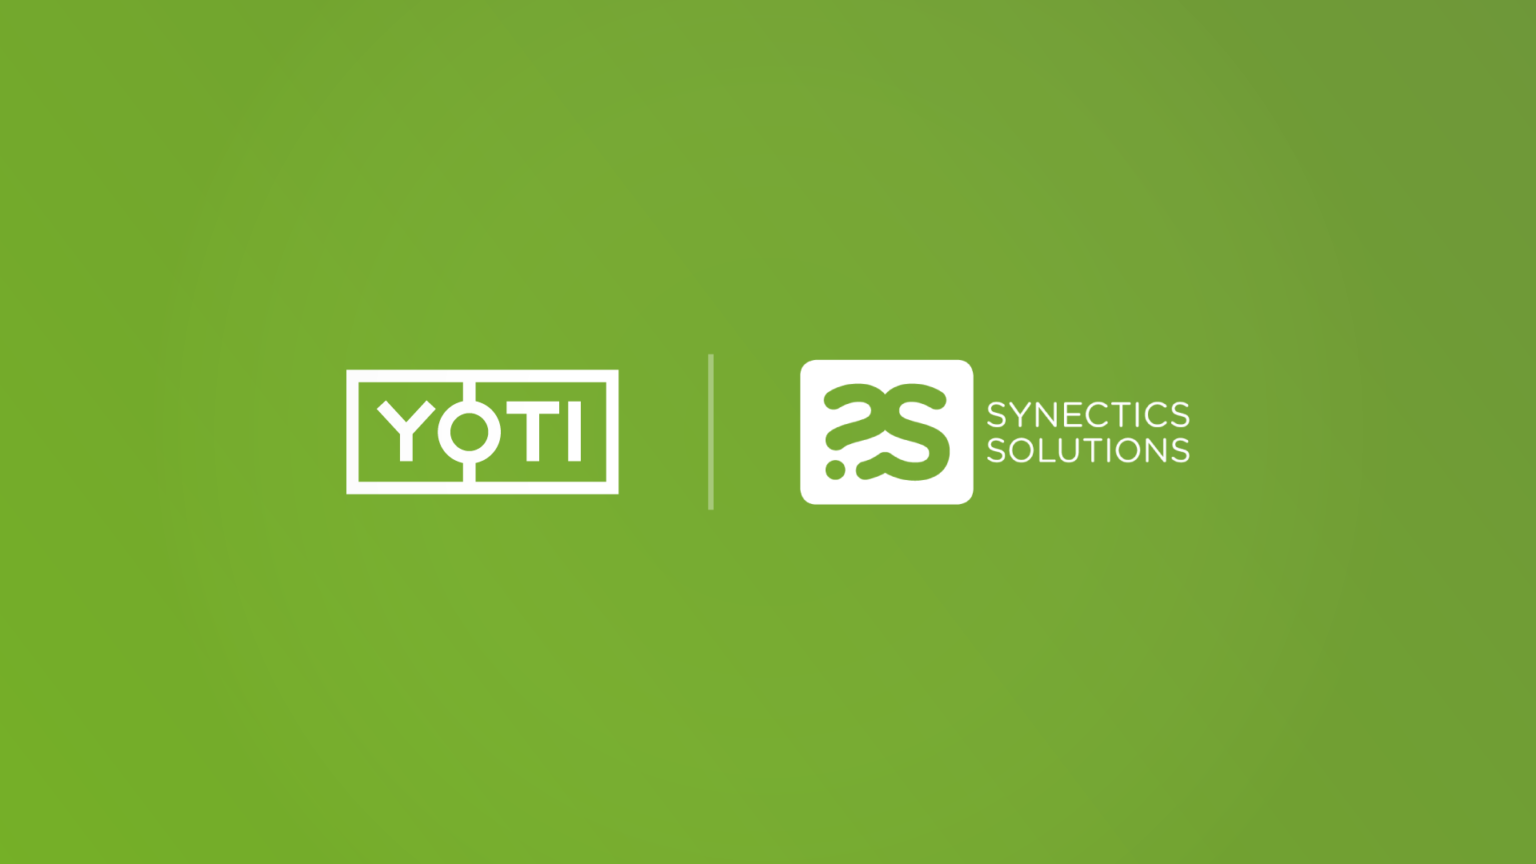 Fighting financial crime with Yoti and Synectics Solutions